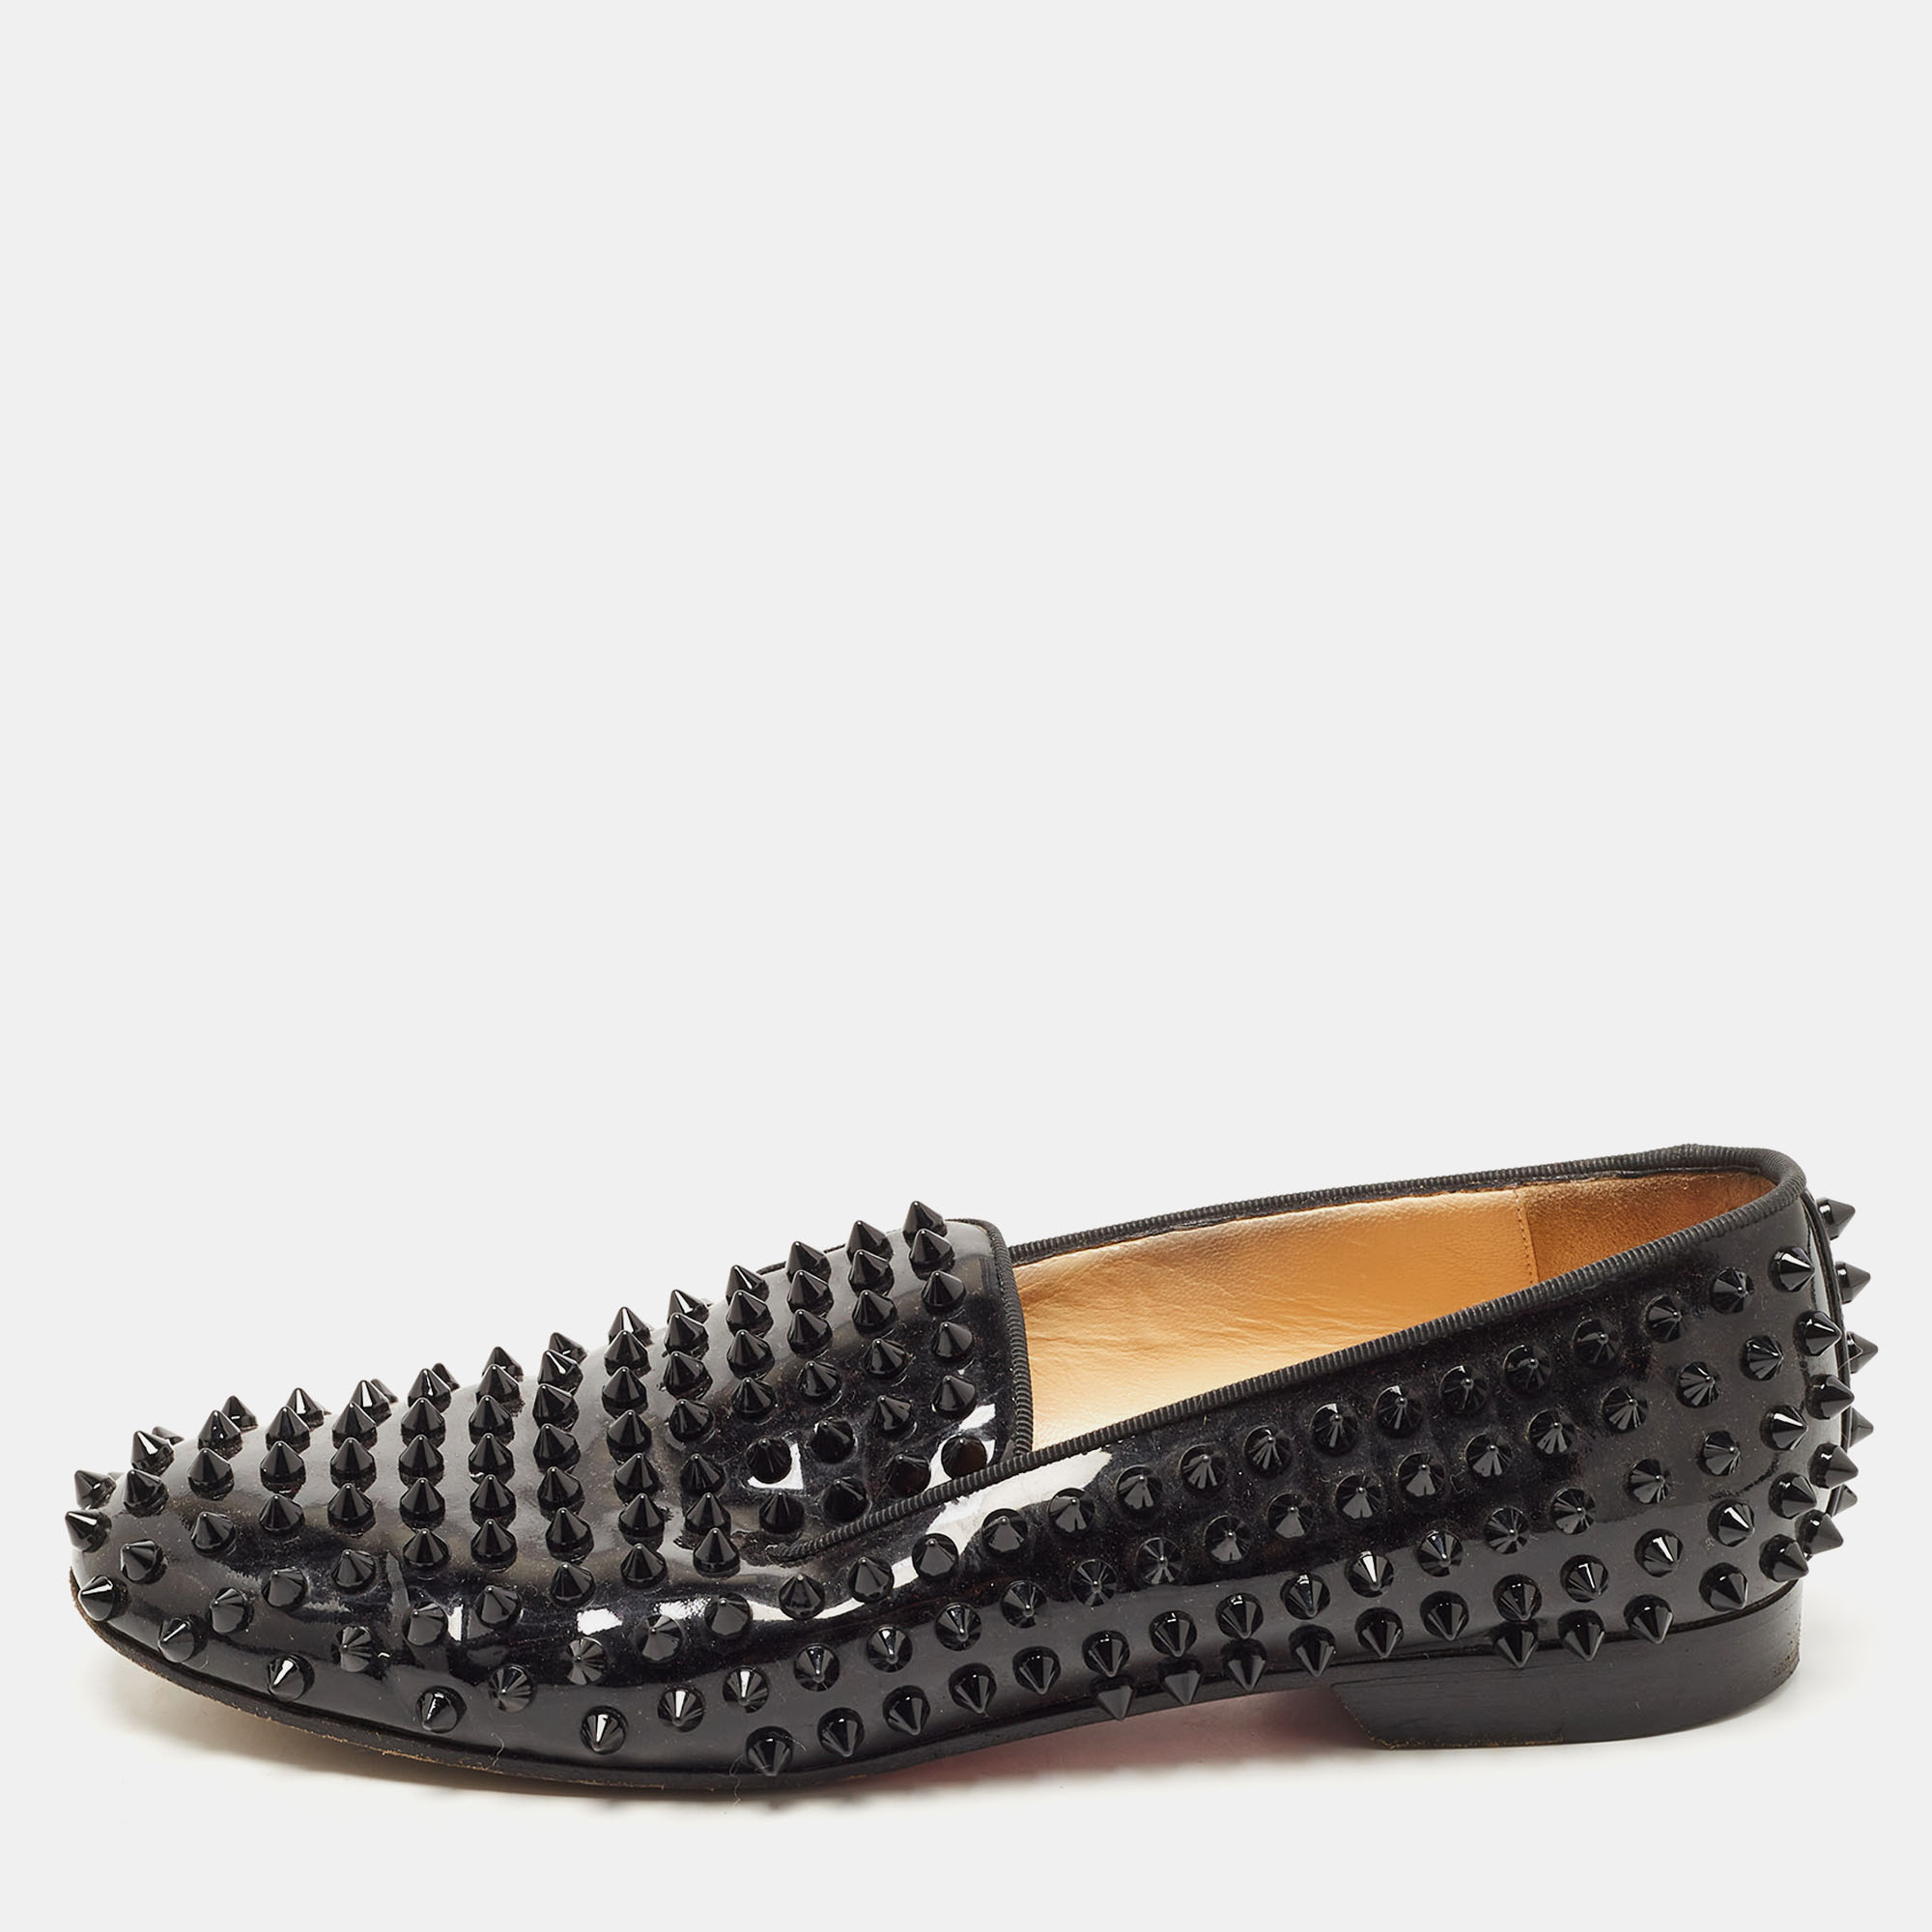 Pre-owned Christian Louboutin Black Patent Leather Dandelion Spikes Smoking Slippers Size 38